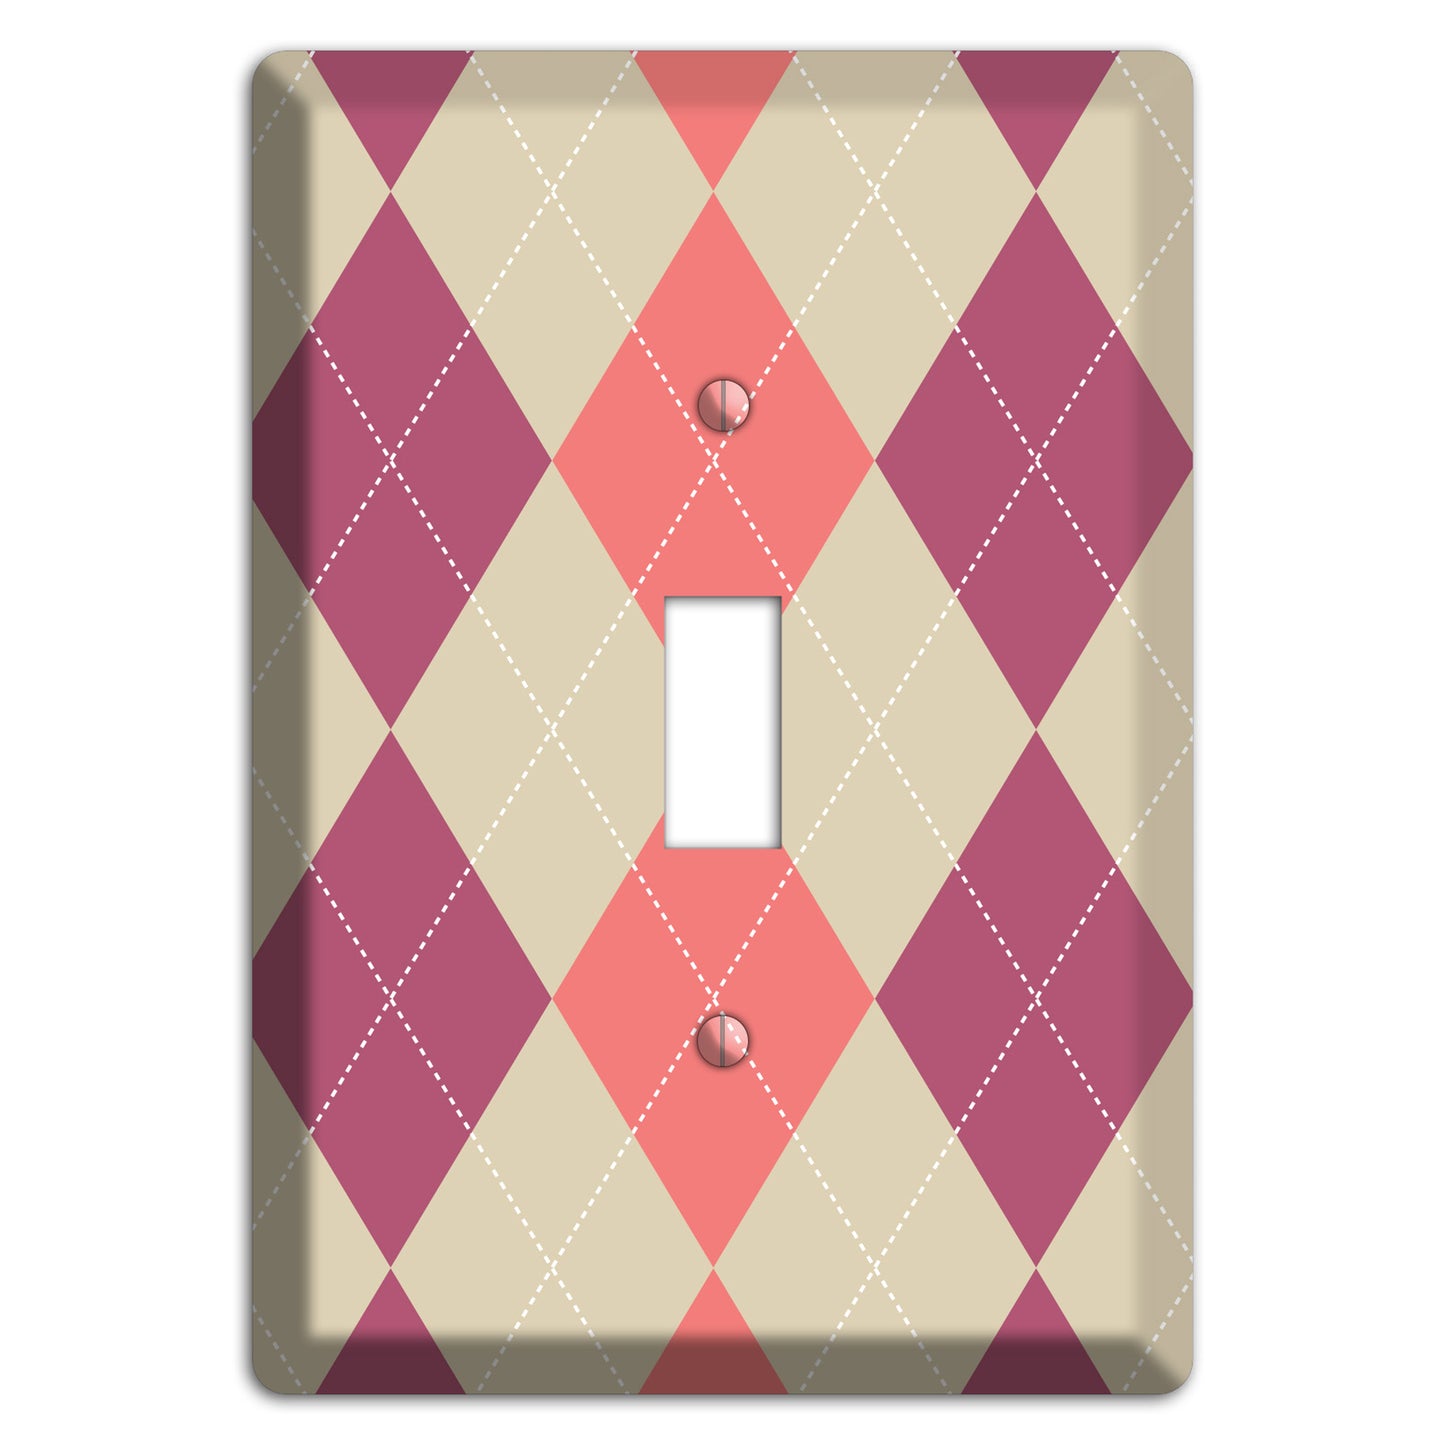 Pink and Tan Argyle Cover Plates